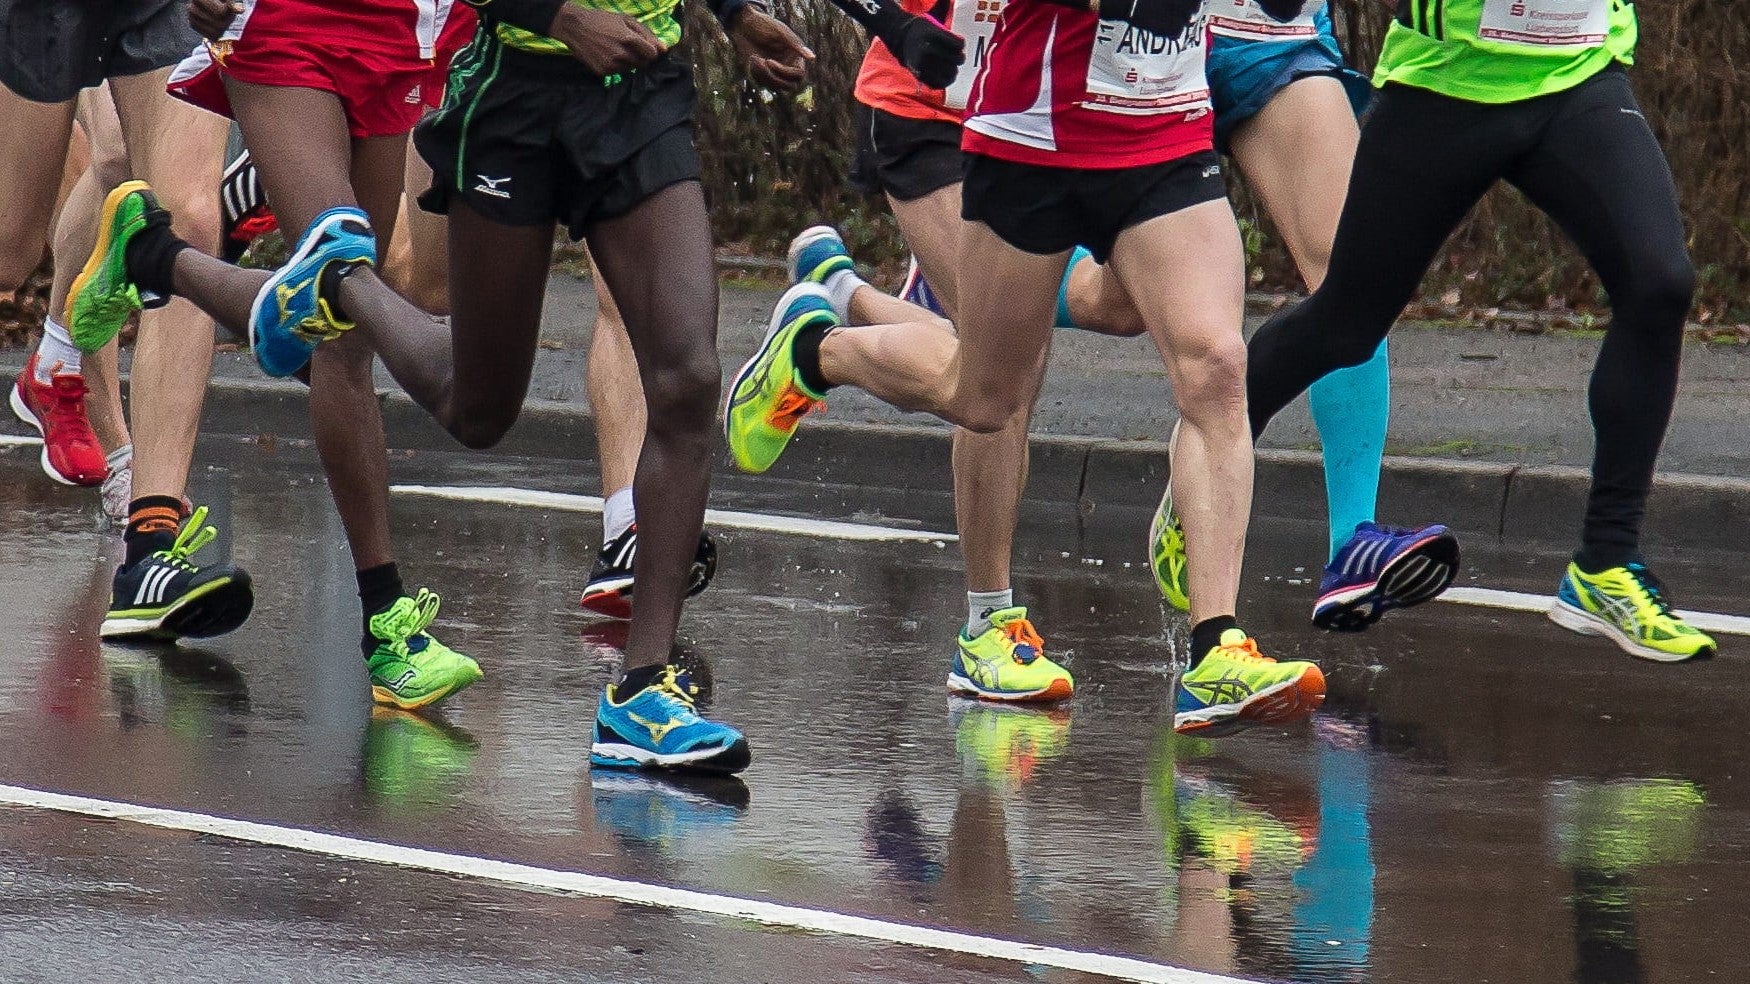 for Popular shoes: pairs Olympic in | Science Tokyo to look running Cool